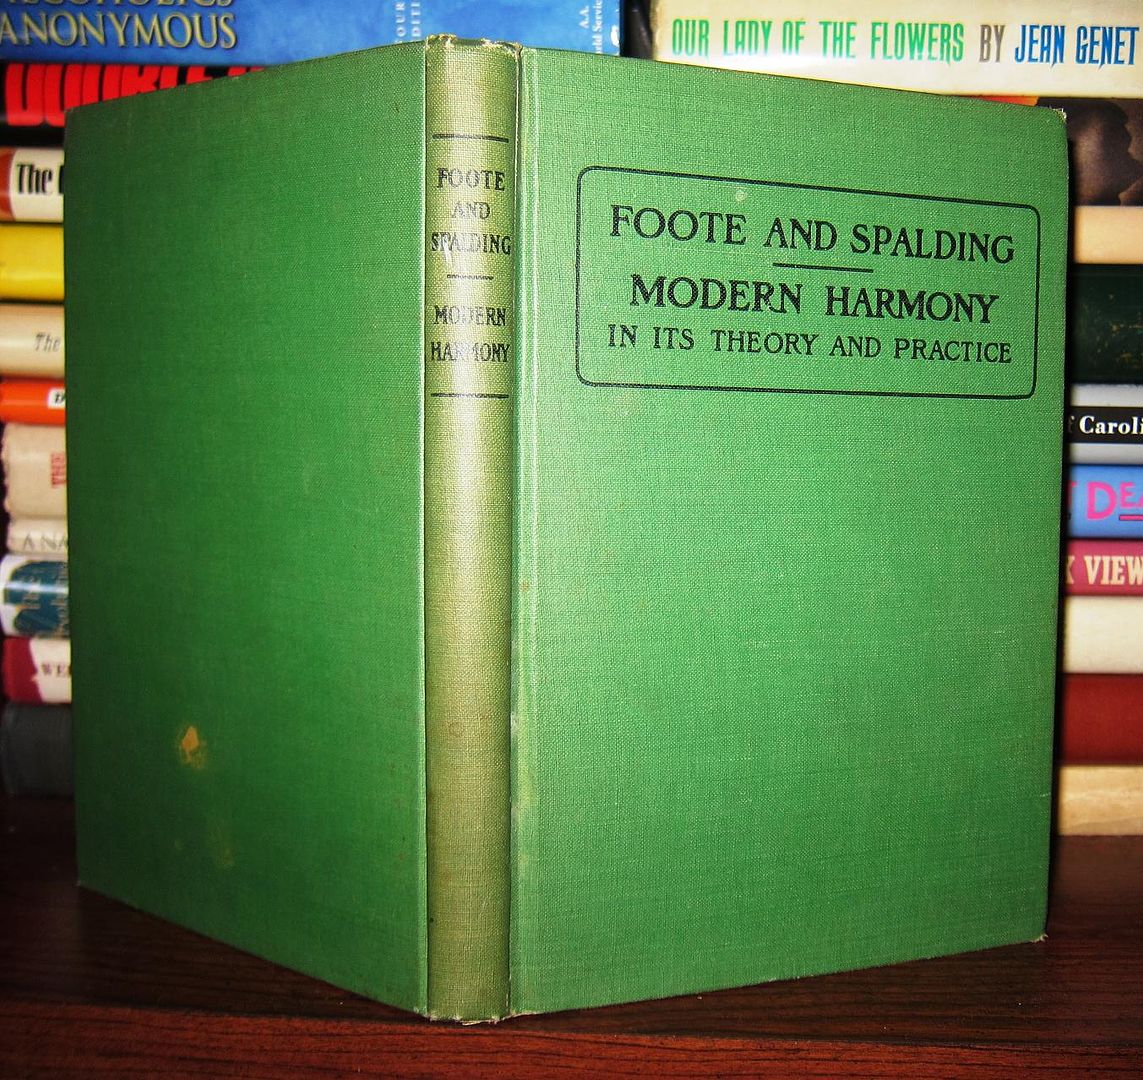 FOOTE, ARTHUR AND SPALDING, WALTER R. - Modern Harmony in Its Theory and Practice